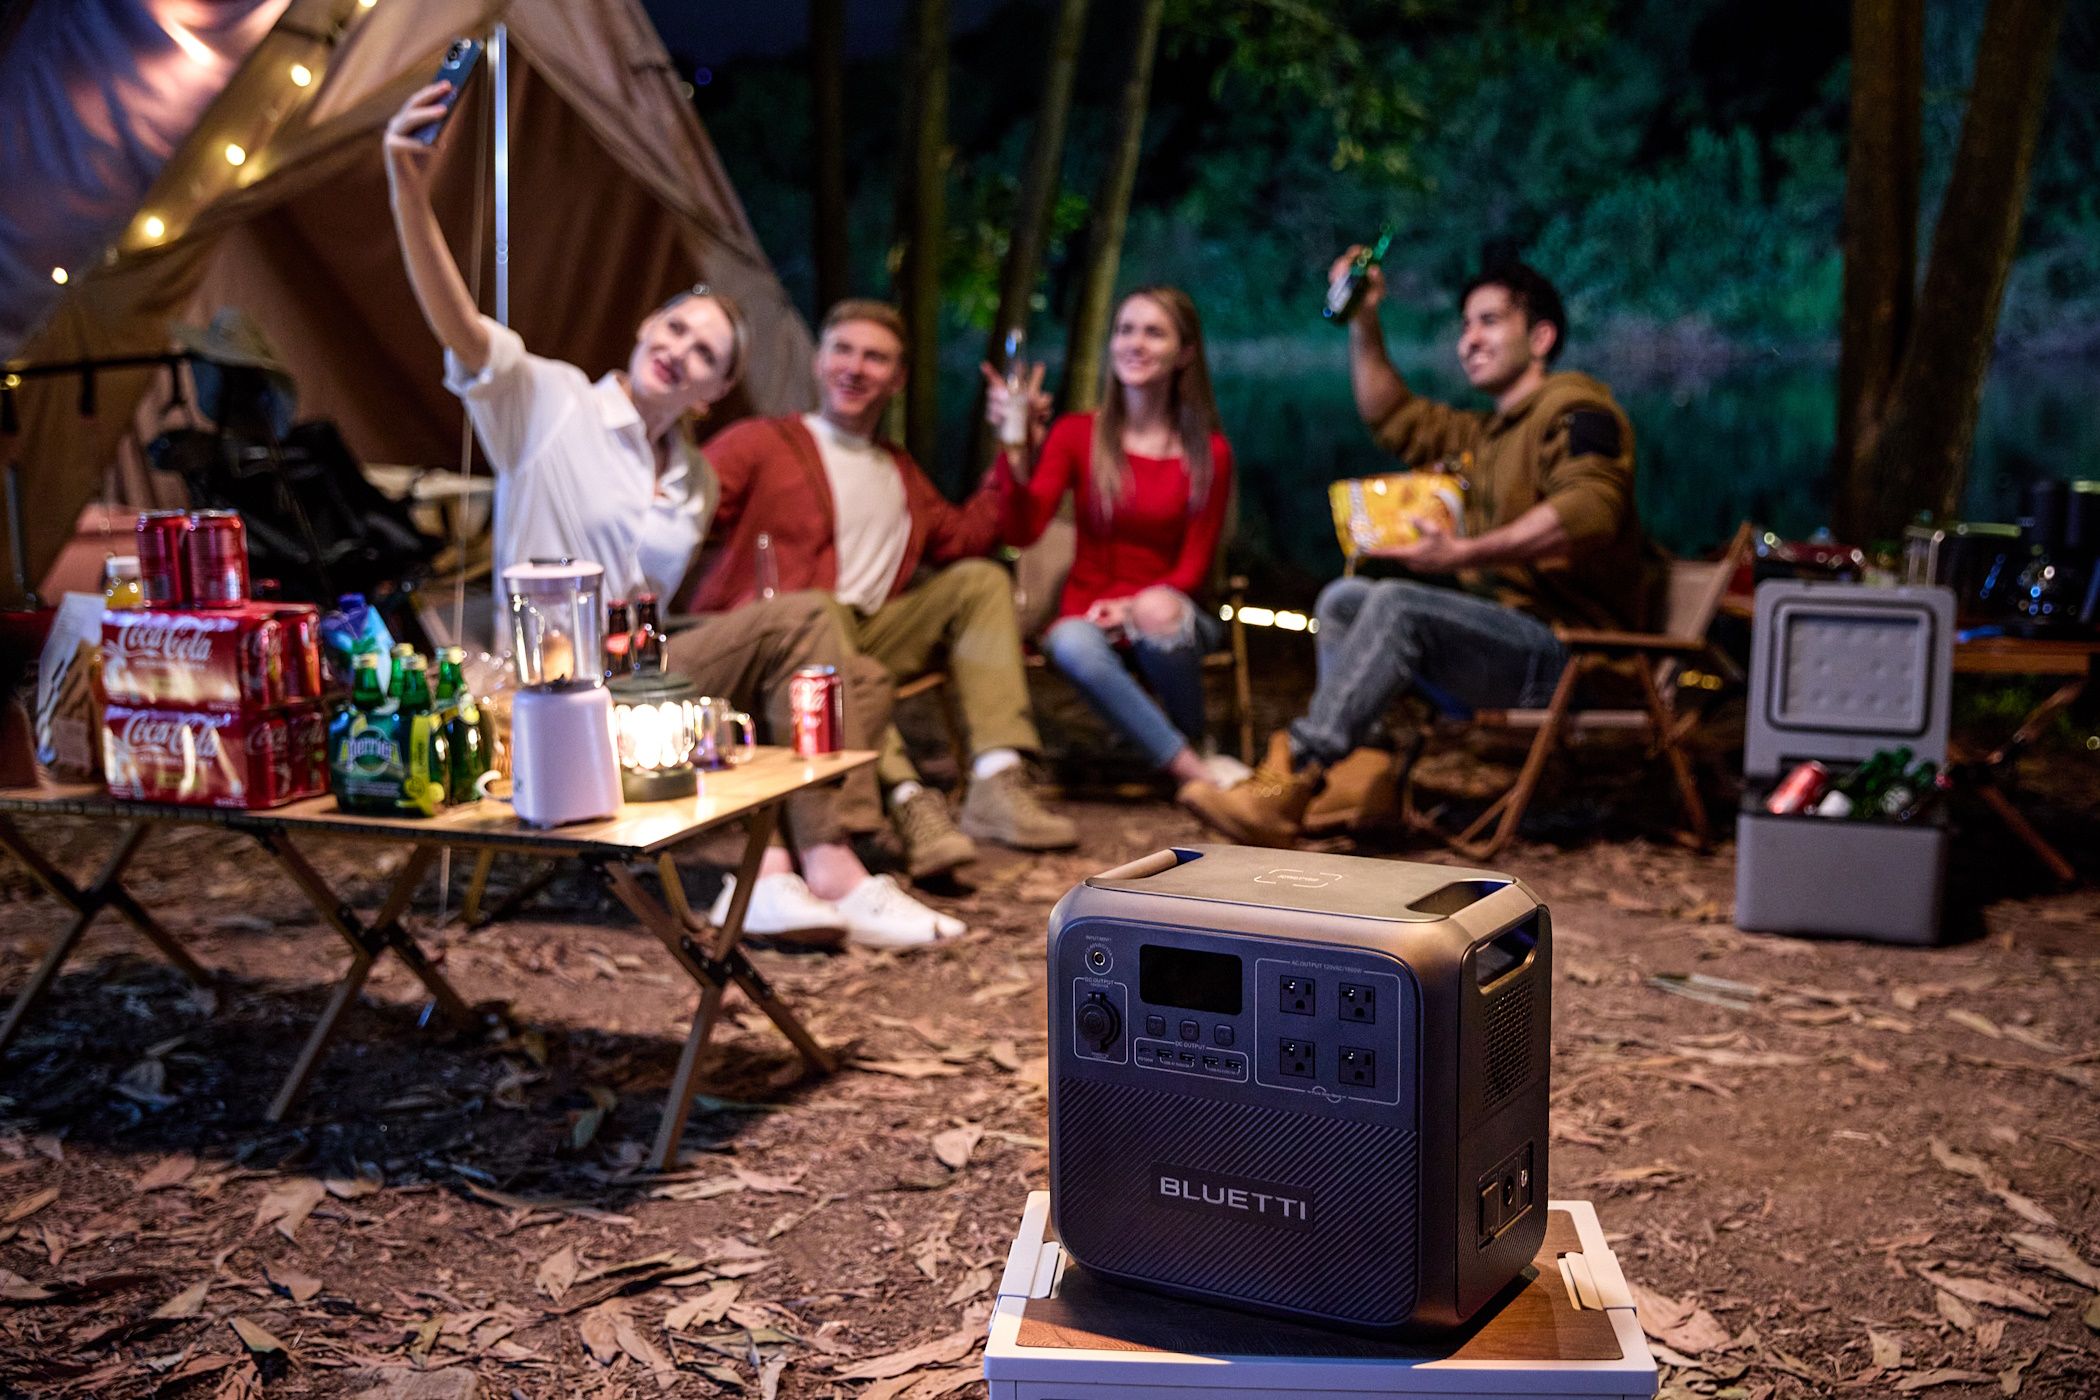 people gathered round outdoors on chairs taking a selfie with Bluetti portable power station in the foreground